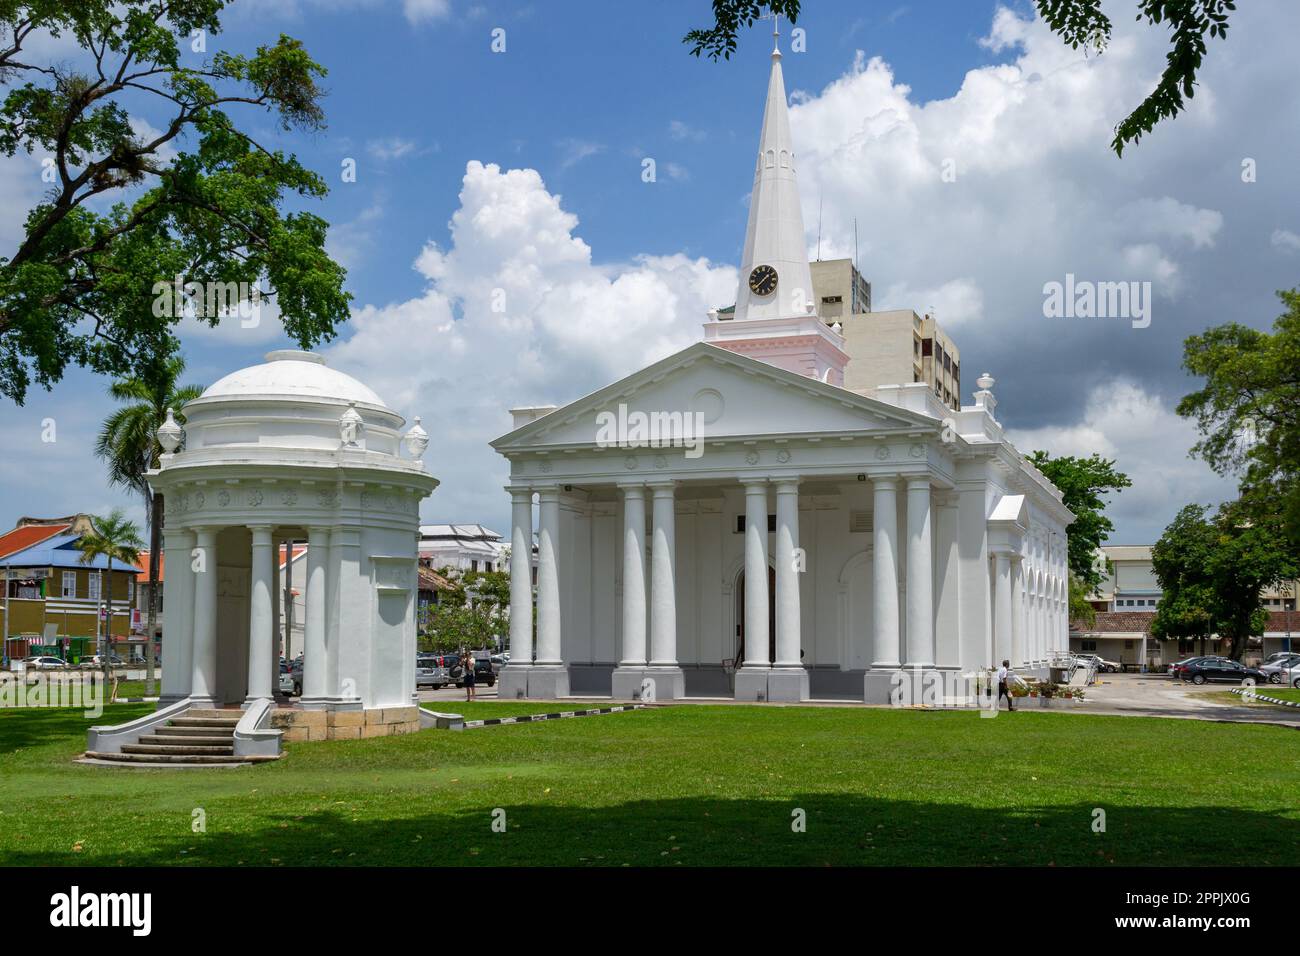 St. George's Anglican Church, Georgetown, Penang, Malaisie Banque D'Images